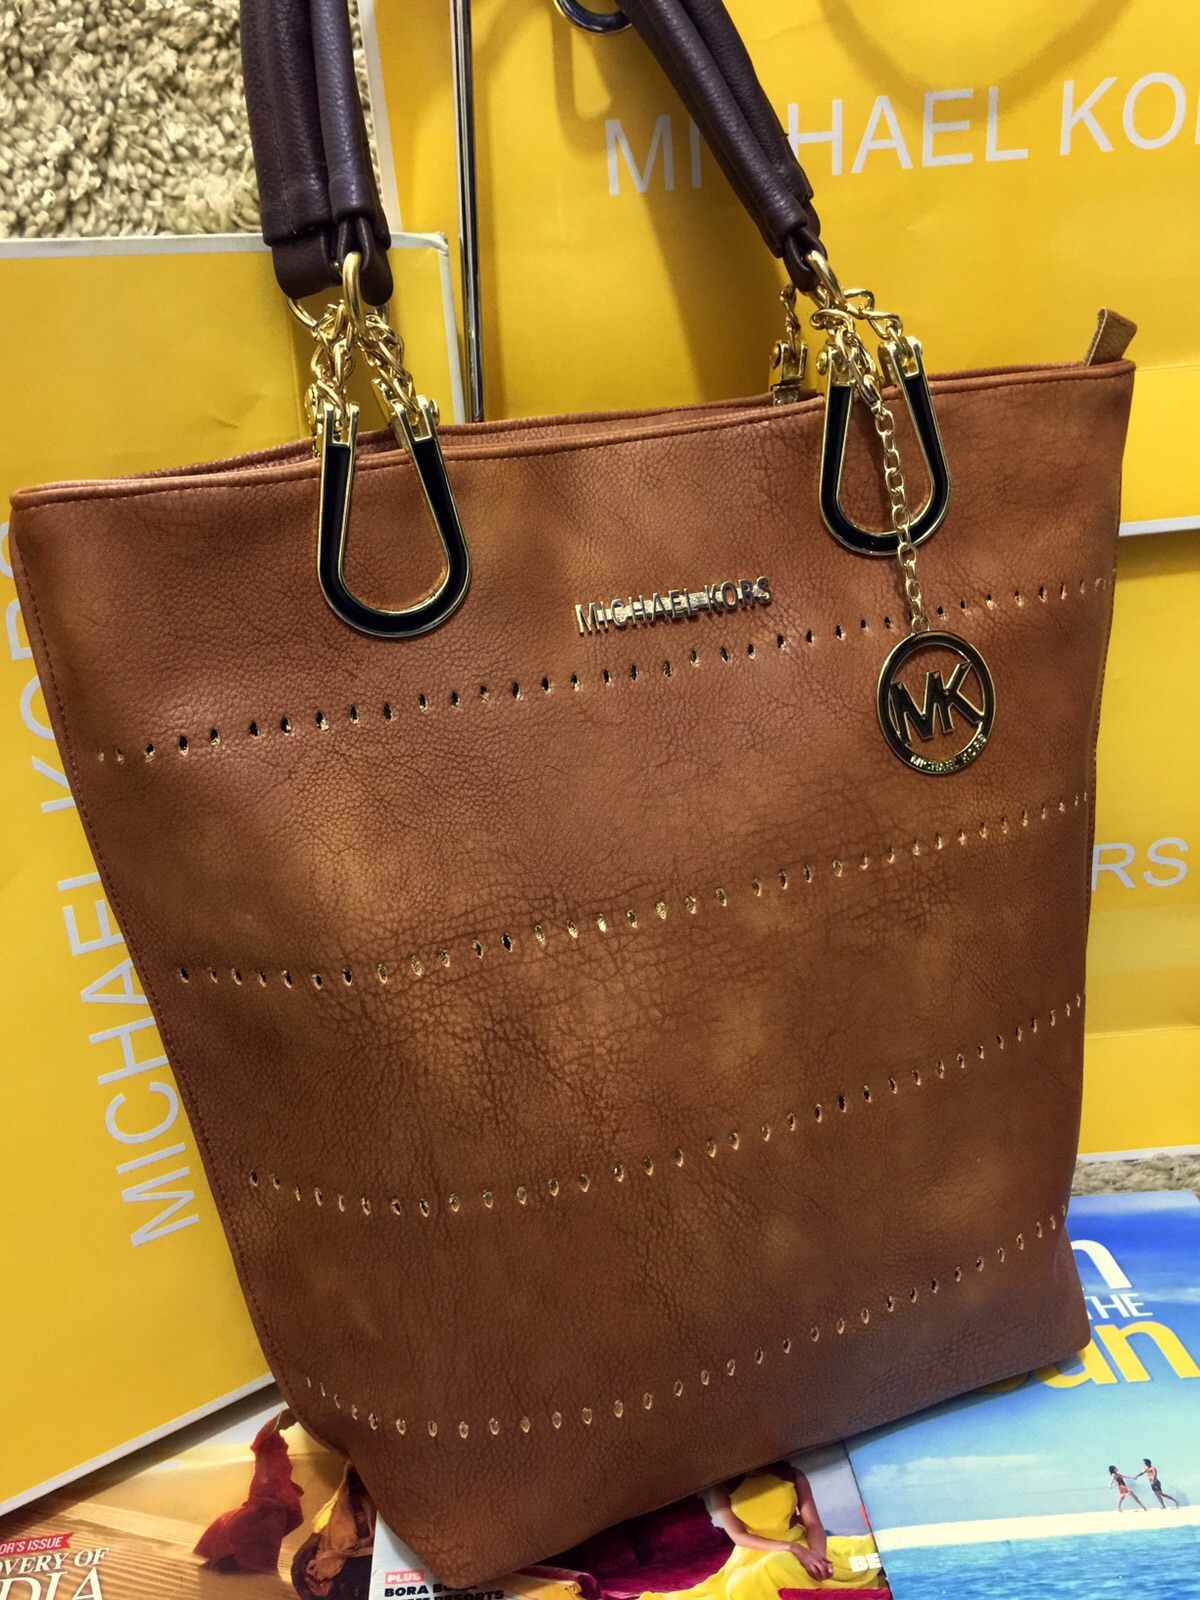 These Chic Michael Kors Handbags Are All Under $100